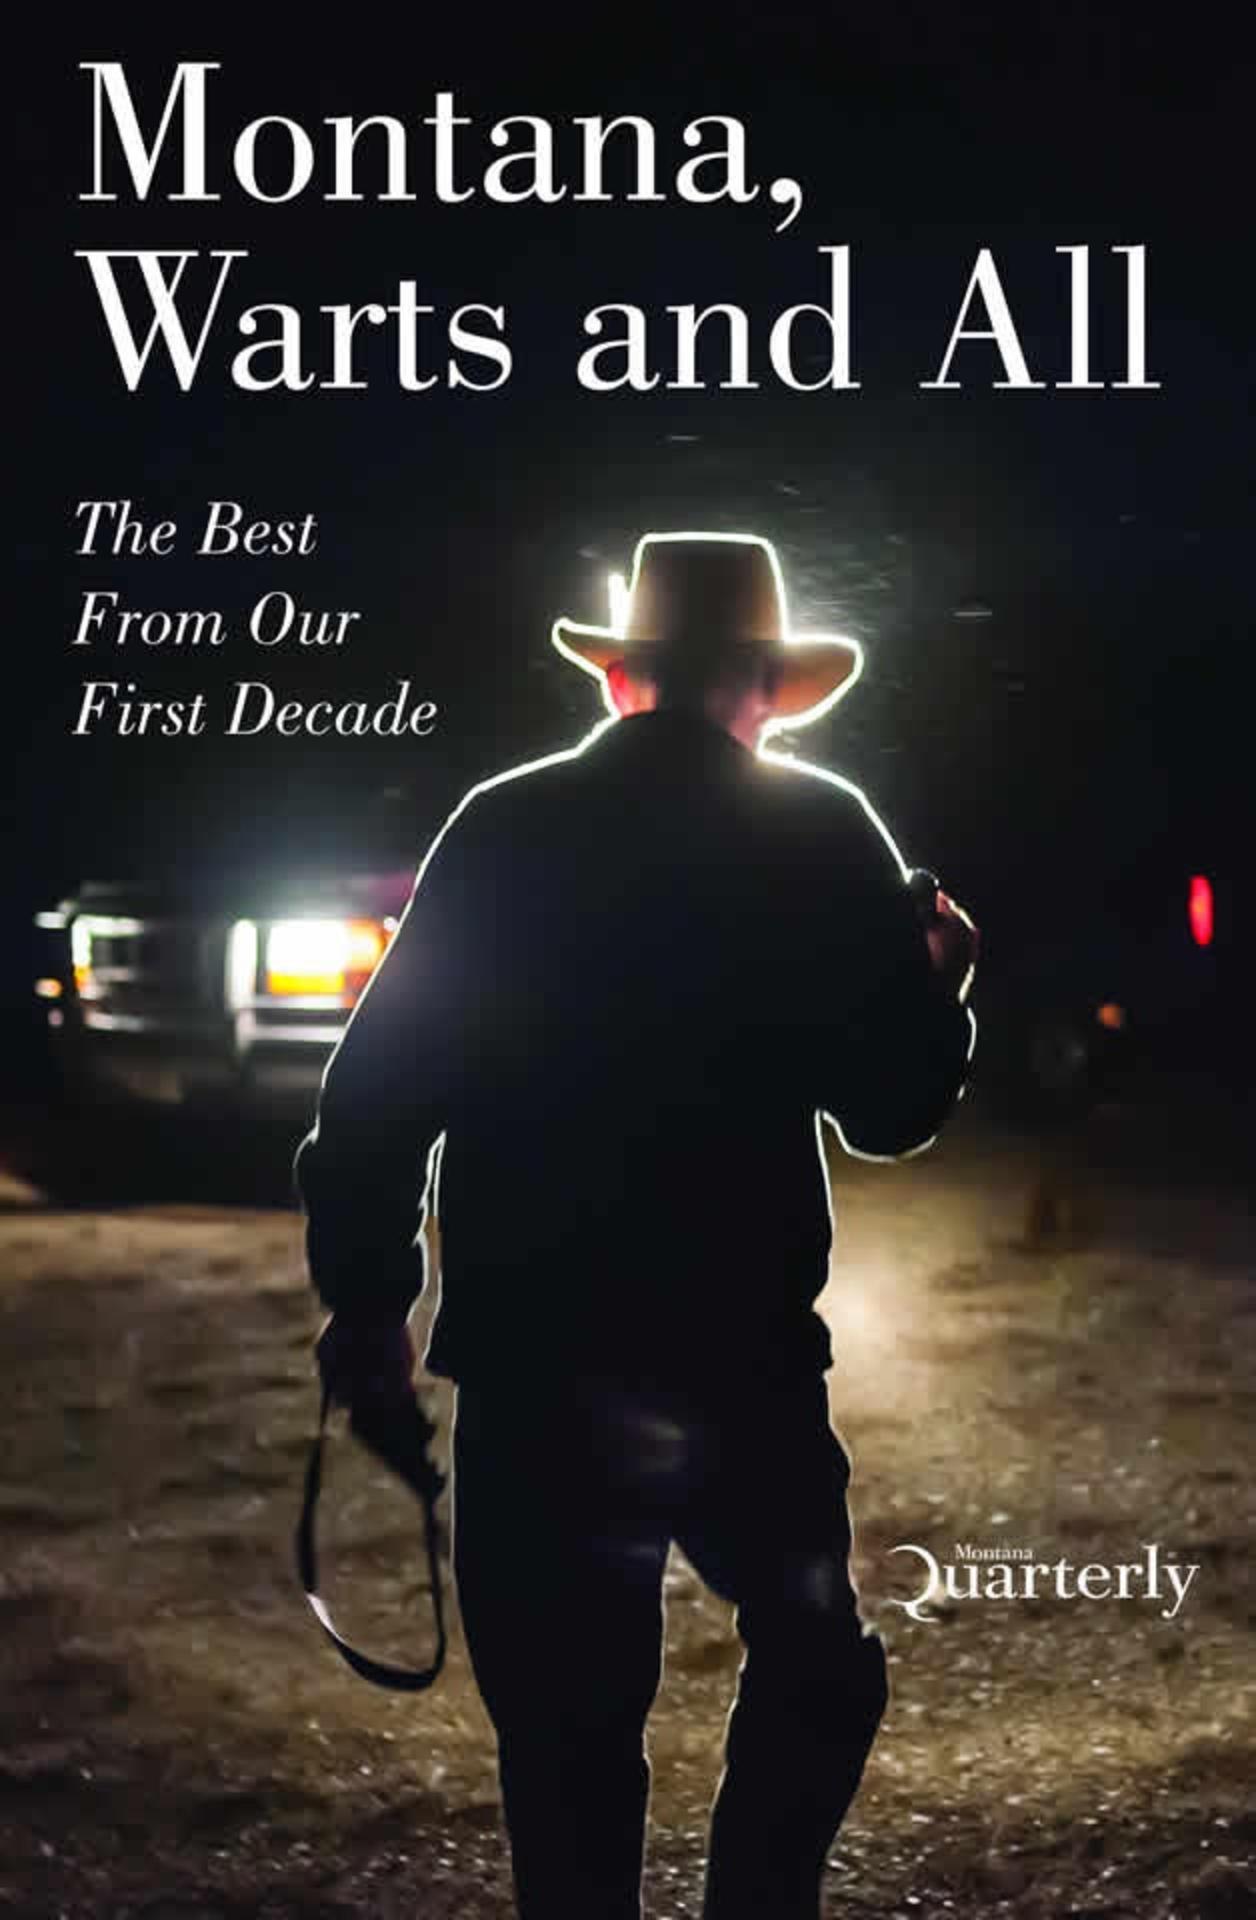 "Montana, Warts And All" is a volume featuring some of the magazine's most resonant stories in recent years.